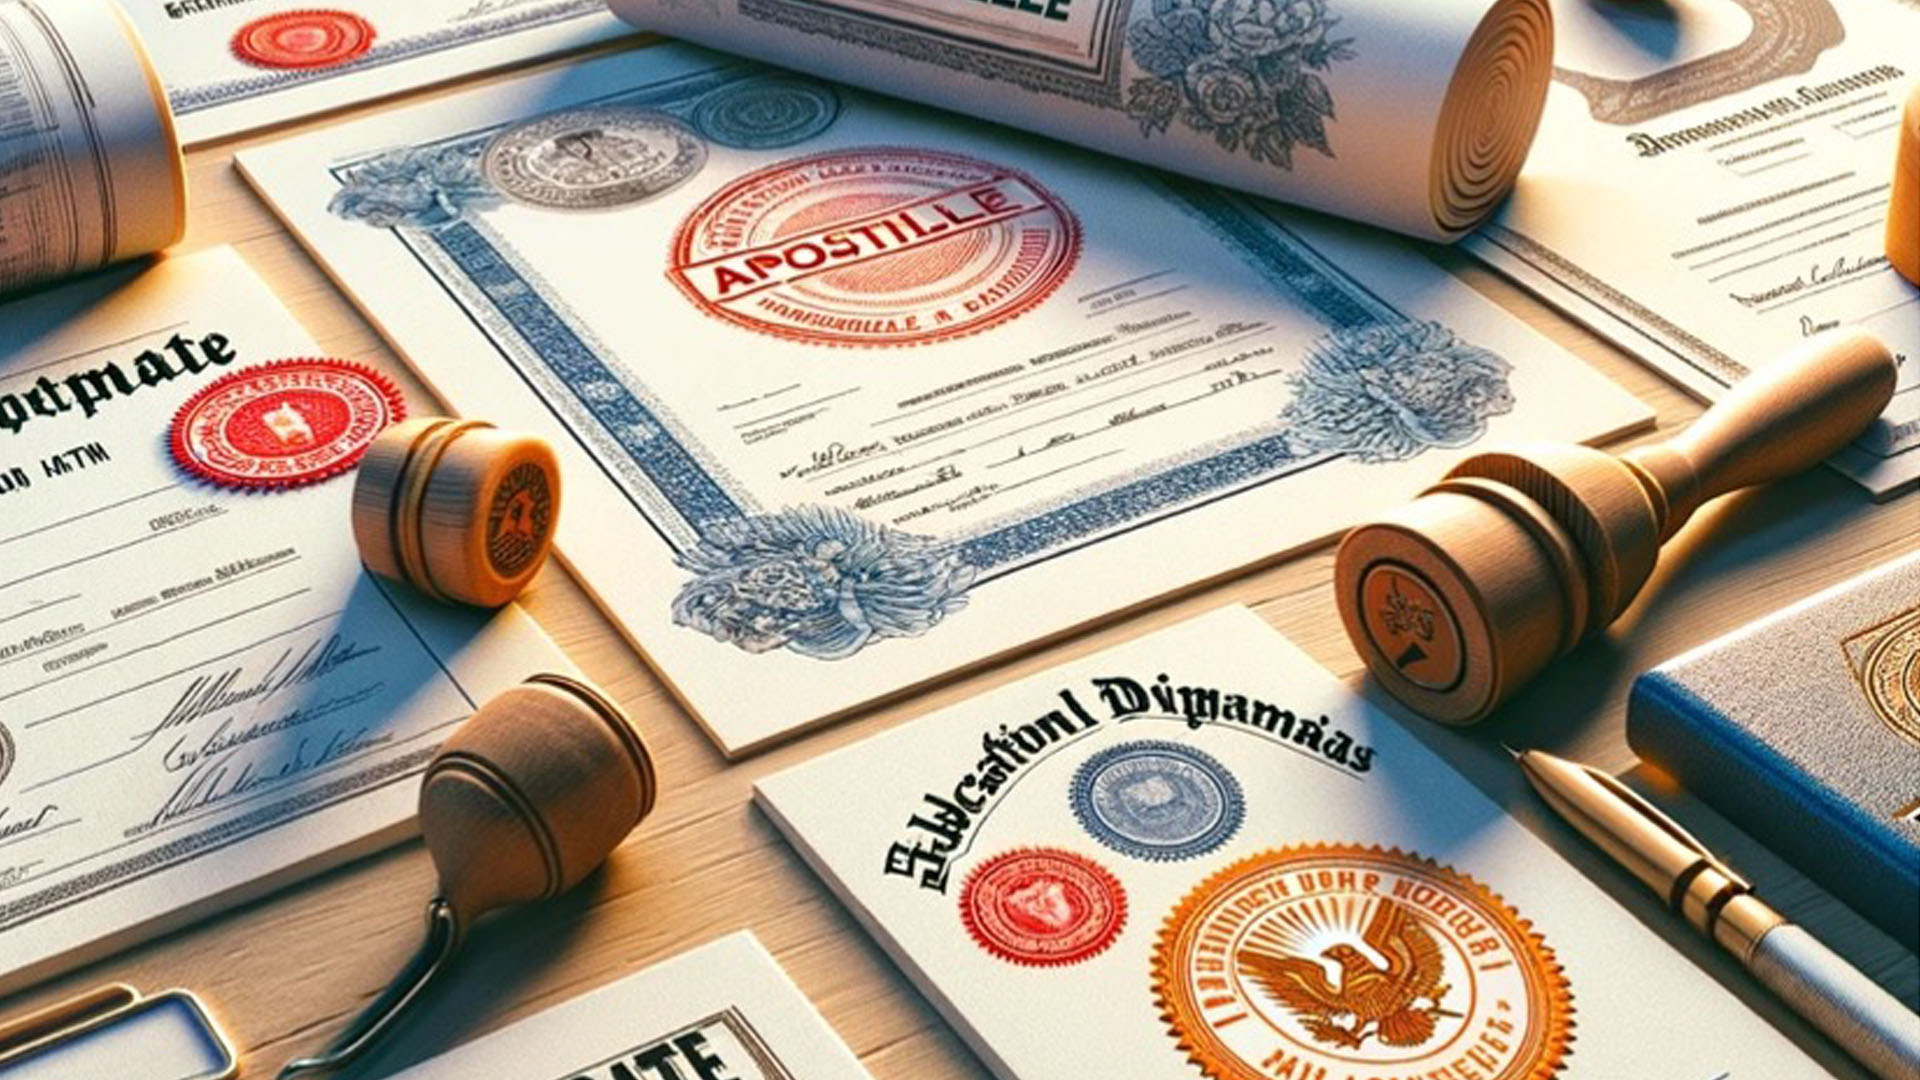 "Illustration of various documents such as birth certificates, marriage certificates, diplomas, and legal papers, all with a visible Apostille stamp, scattered on a wooden table."